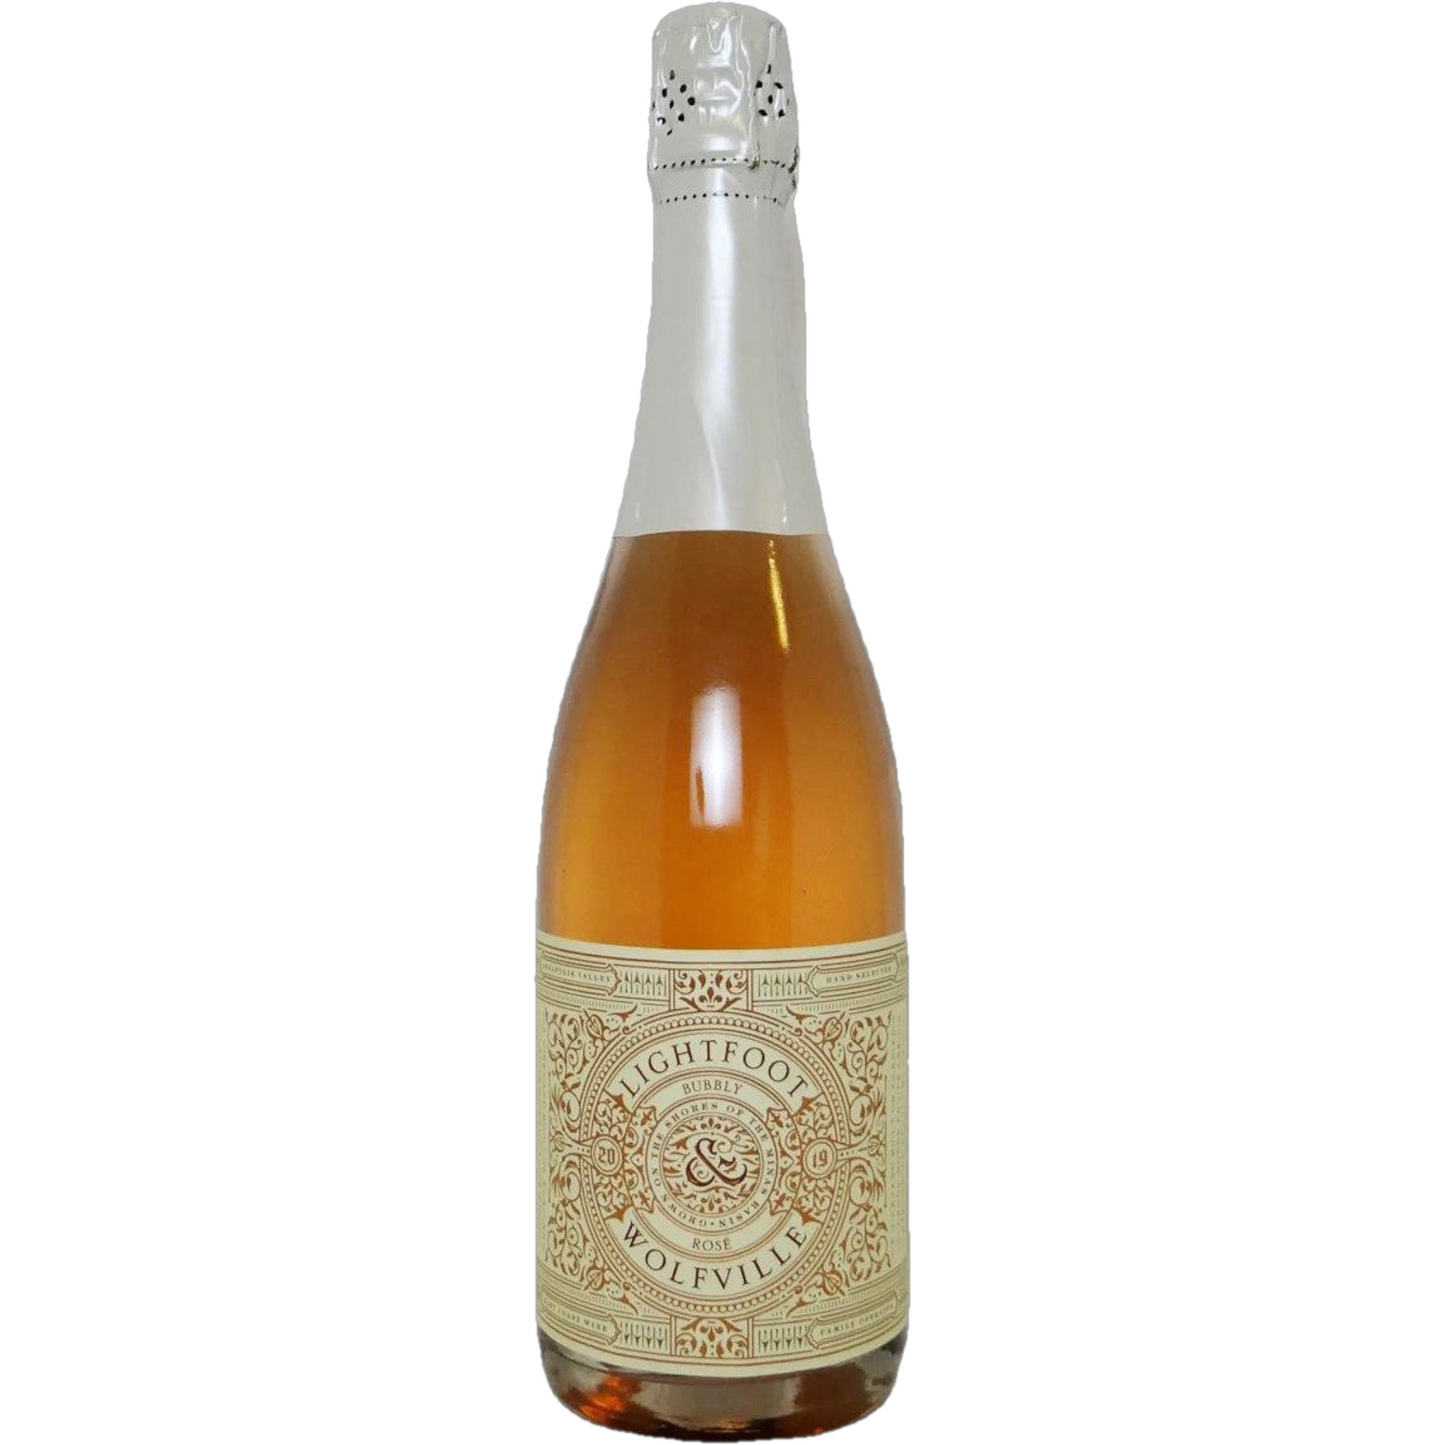 LIGHTFOOT and WOLFVILLE BUBBLY ROSE